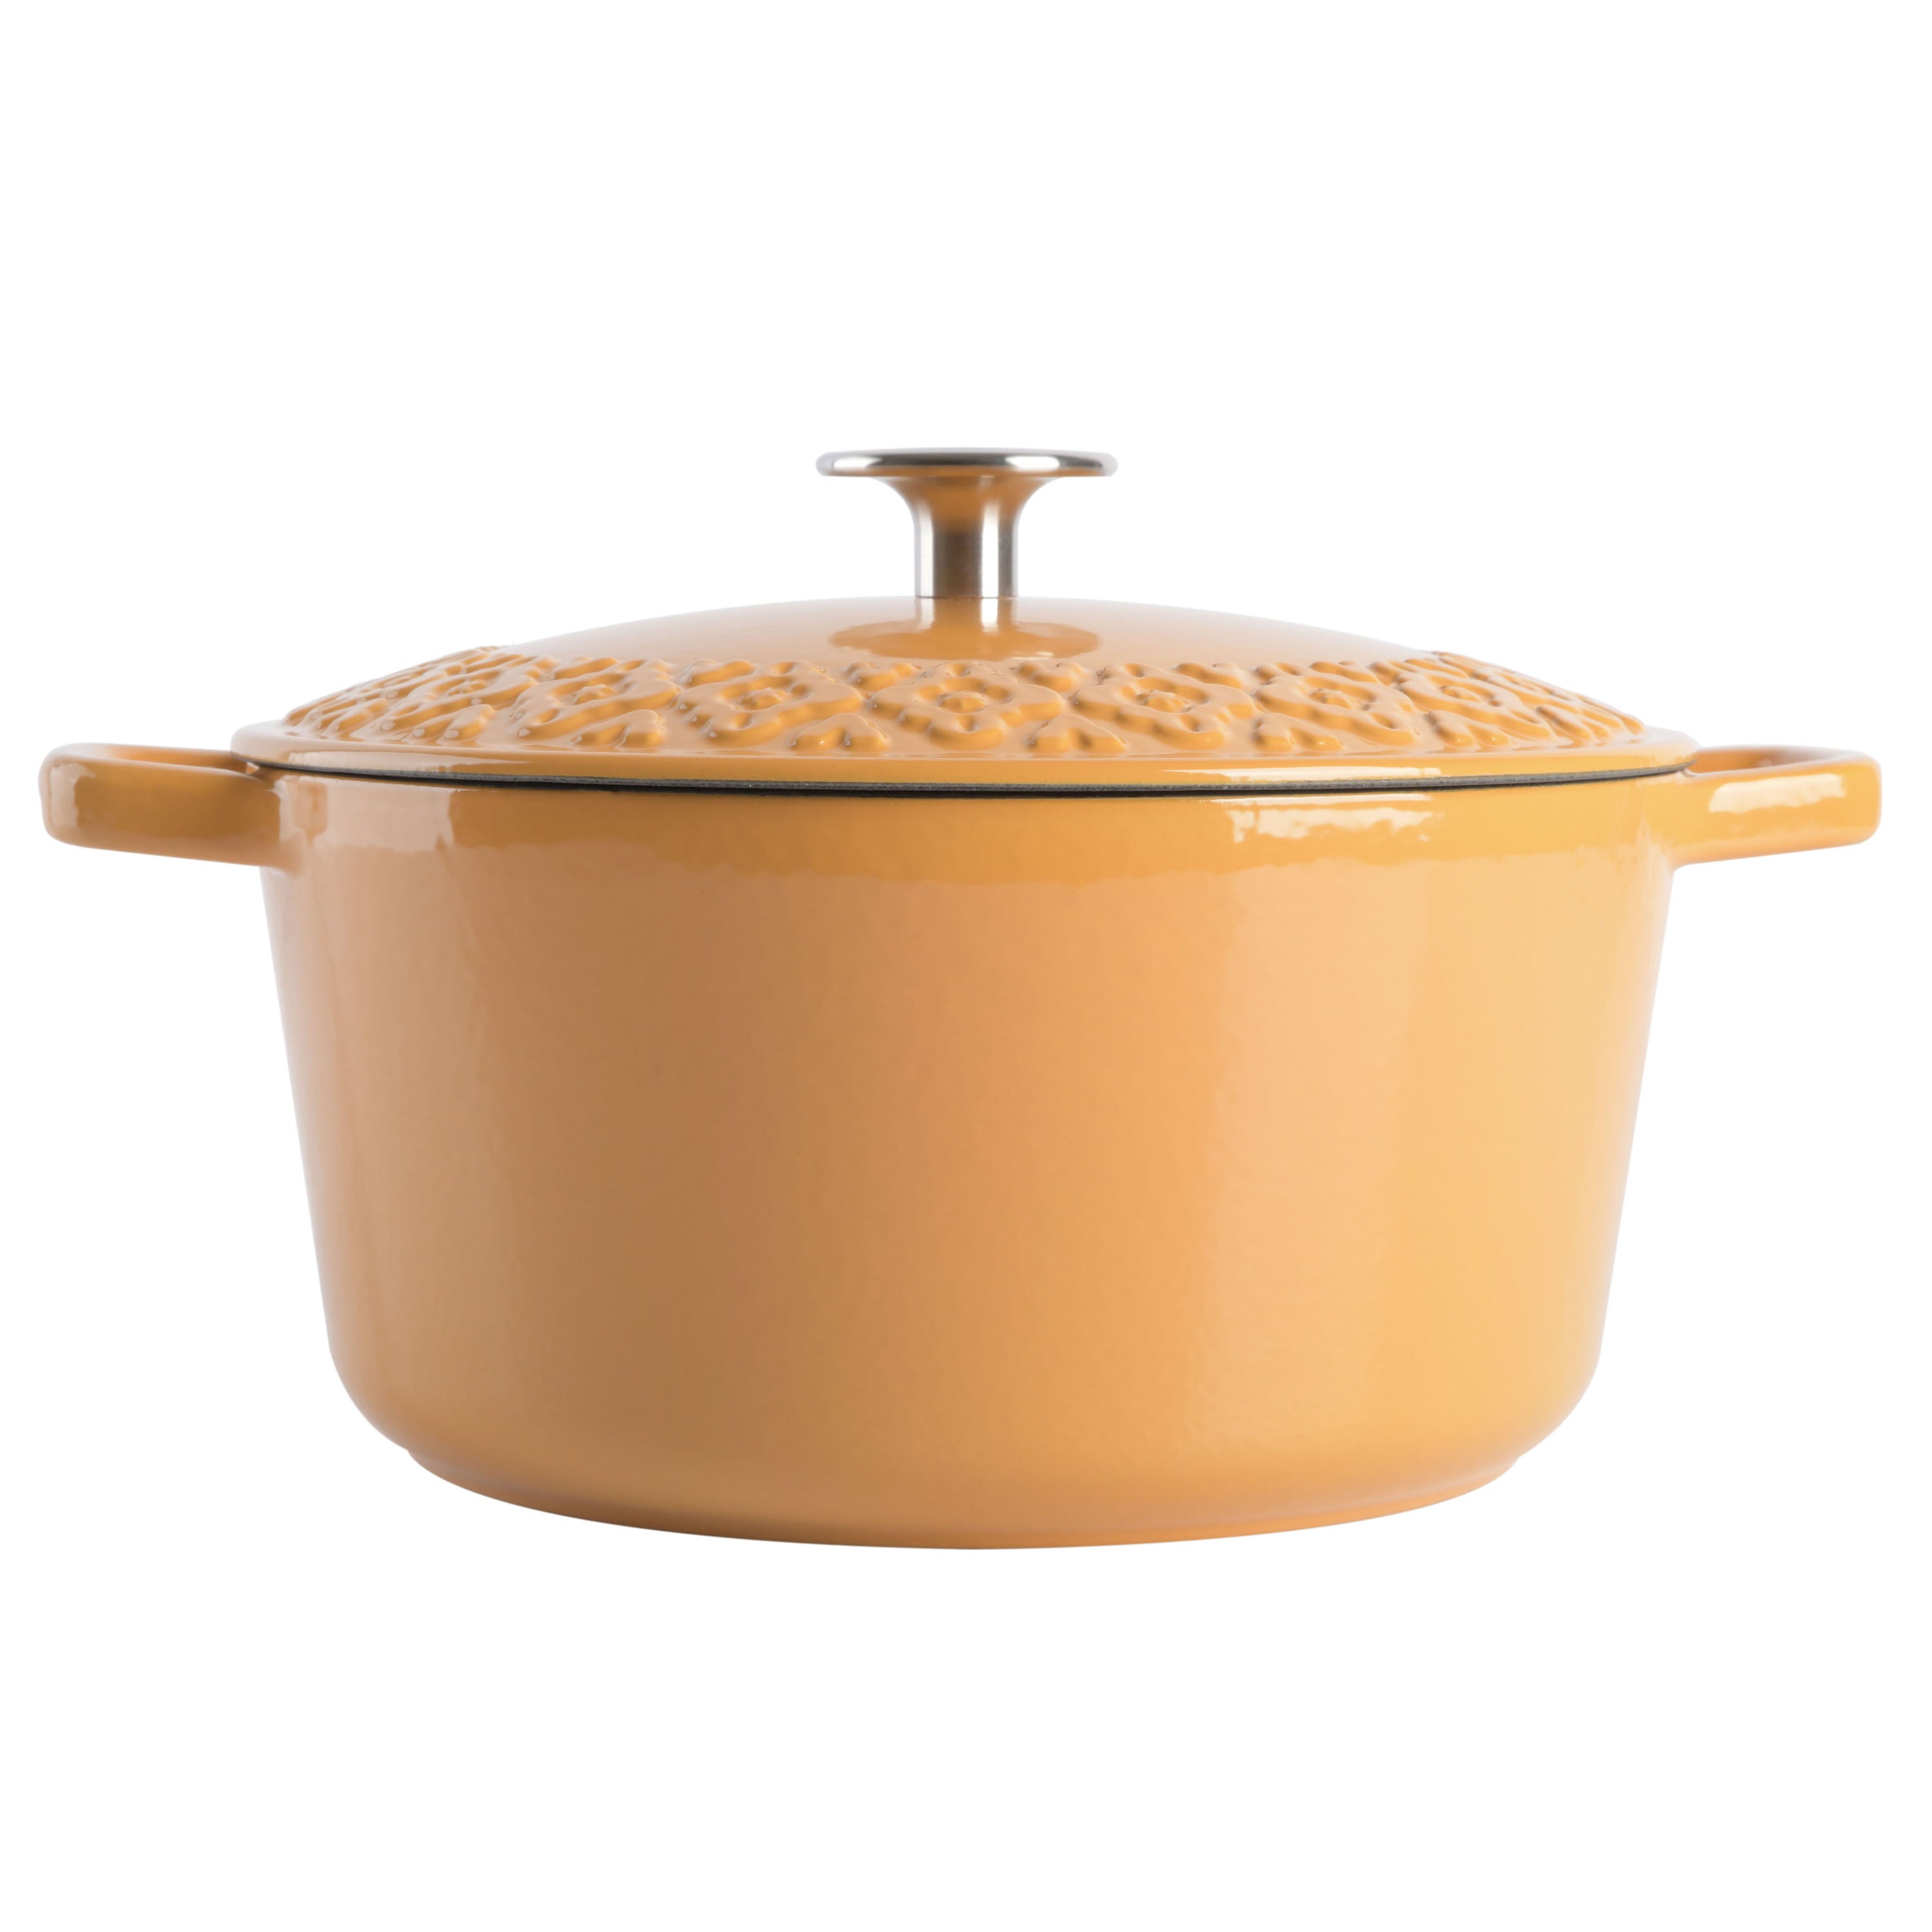 Spice by Tia Mowry 3.5 qt Enameled Cast Iron Dutch Oven w/Embossed Lid - Honey Gold (87075.02R)